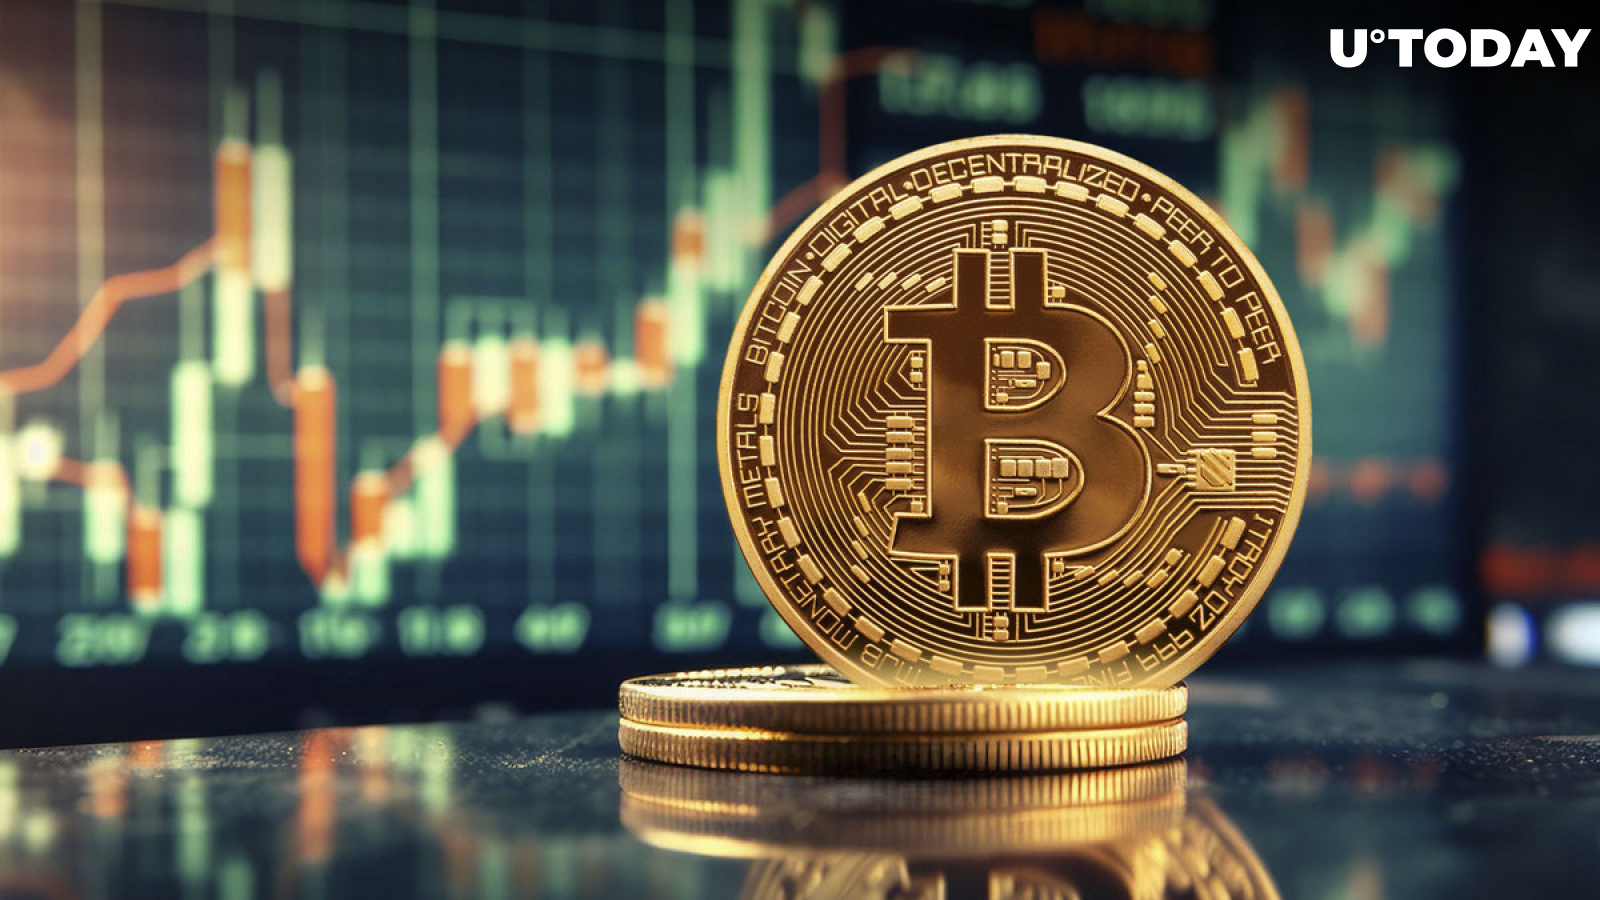 Bitcoin (BTC) Could Be on Verge of Hitting $112,000 and Even Higher